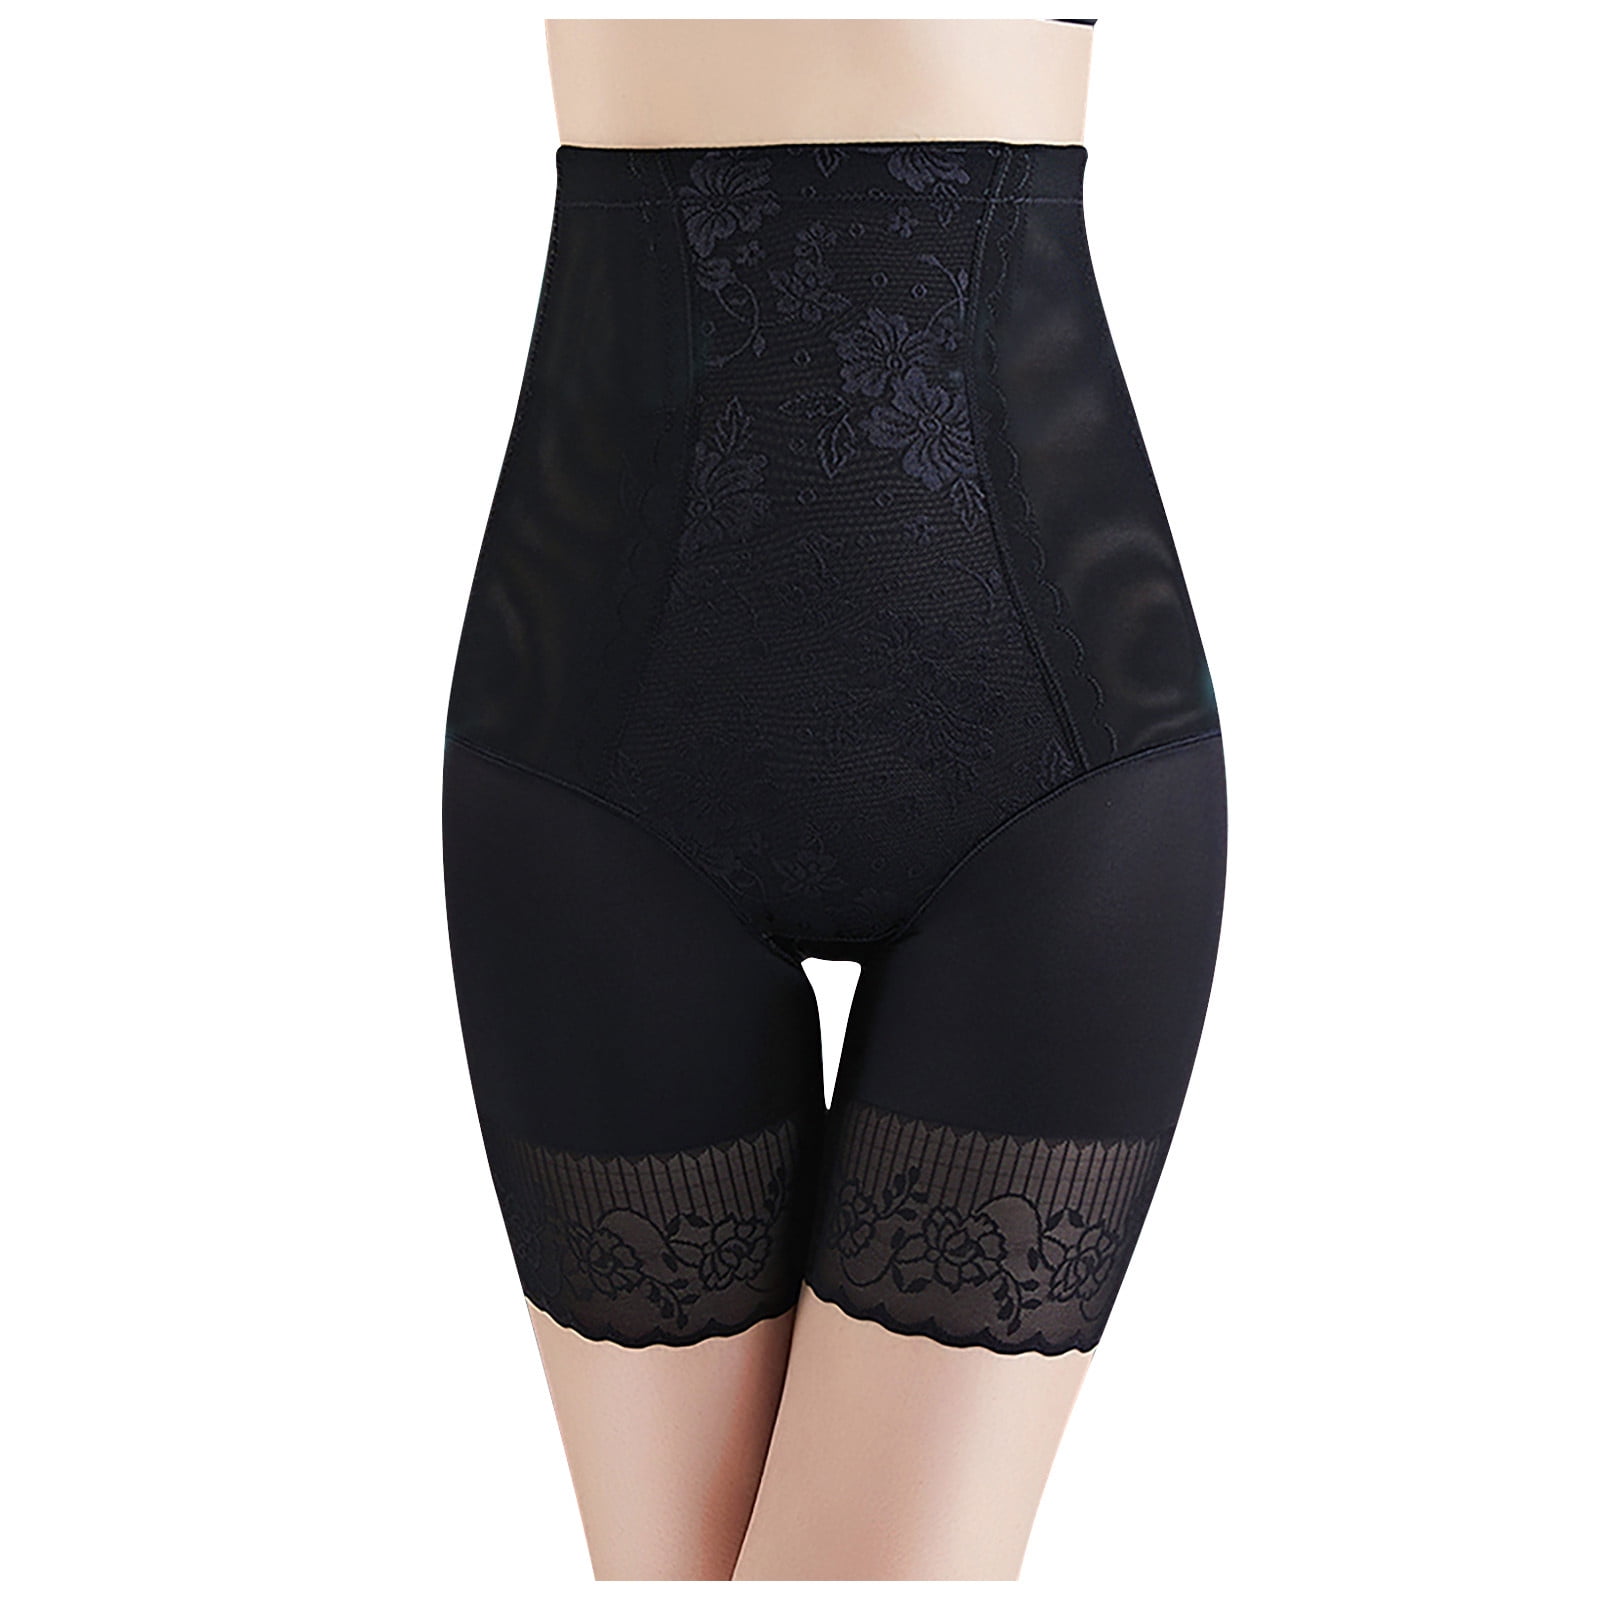 SALE 70% OFF, High Waisted Tummy Control Pants, hip, waist, trousers,  foundation garment, 😍This Amazing Shapewear Pants Holds In Your Core,  Cinches Your Waist, And Lift Your hips.❤️🍑